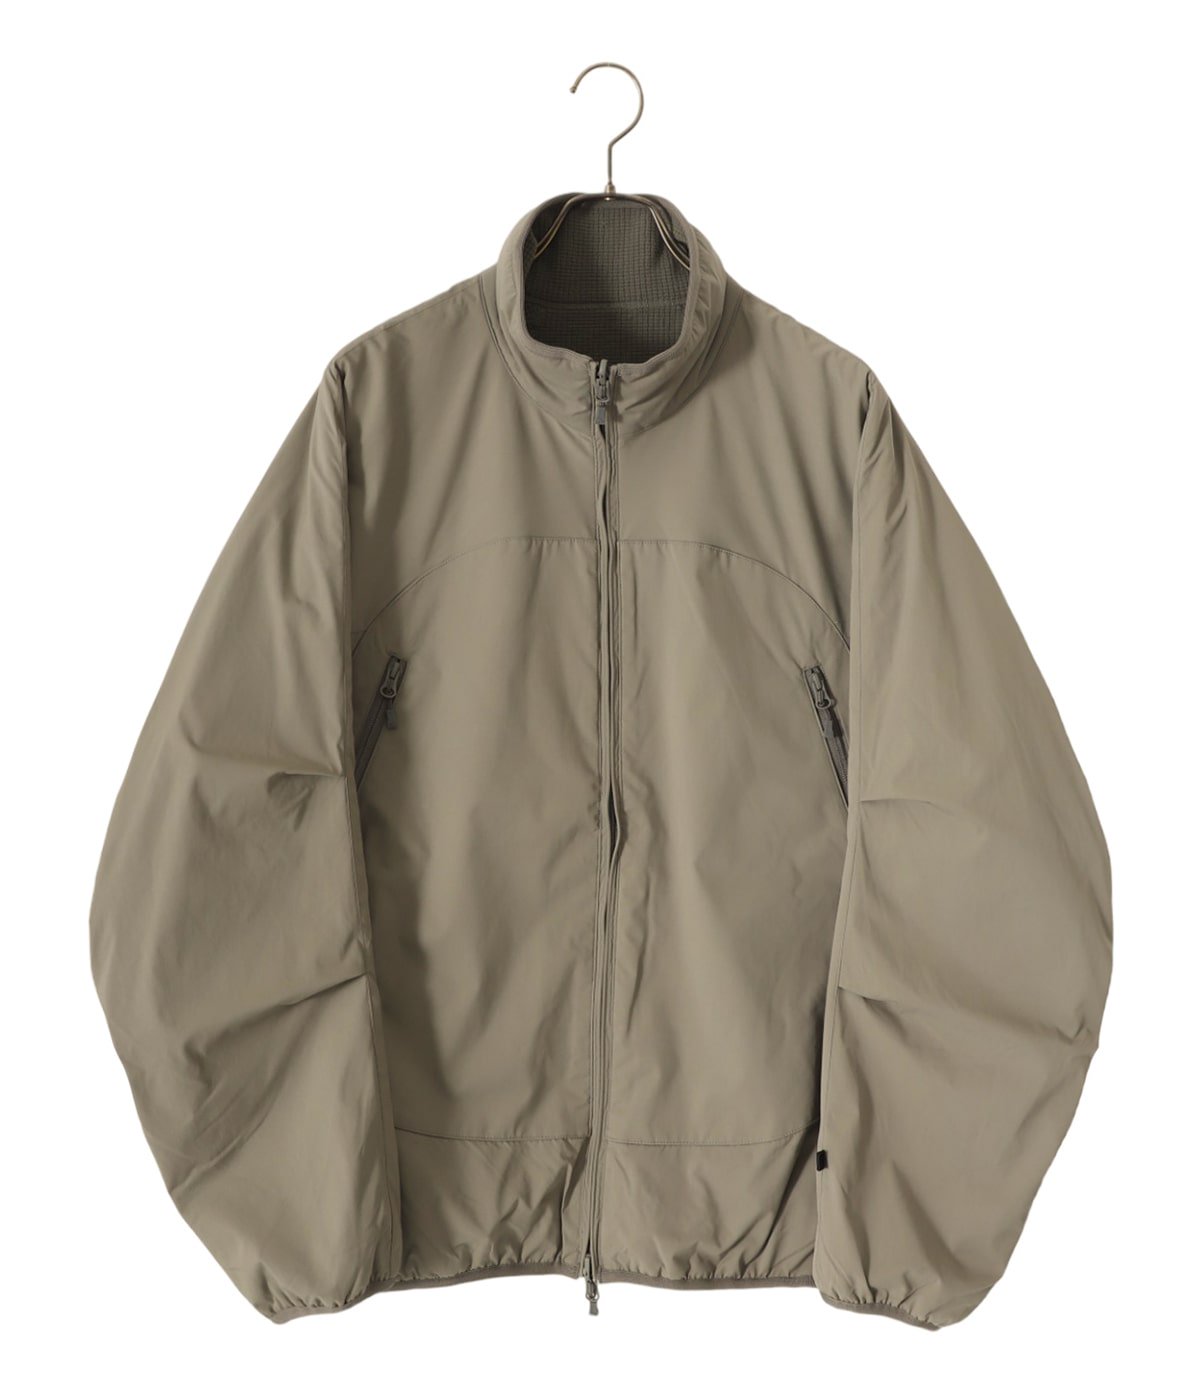 TECH REVERSIBLE MIL ECWCS STAND JACKET購入後数回着用の美品です